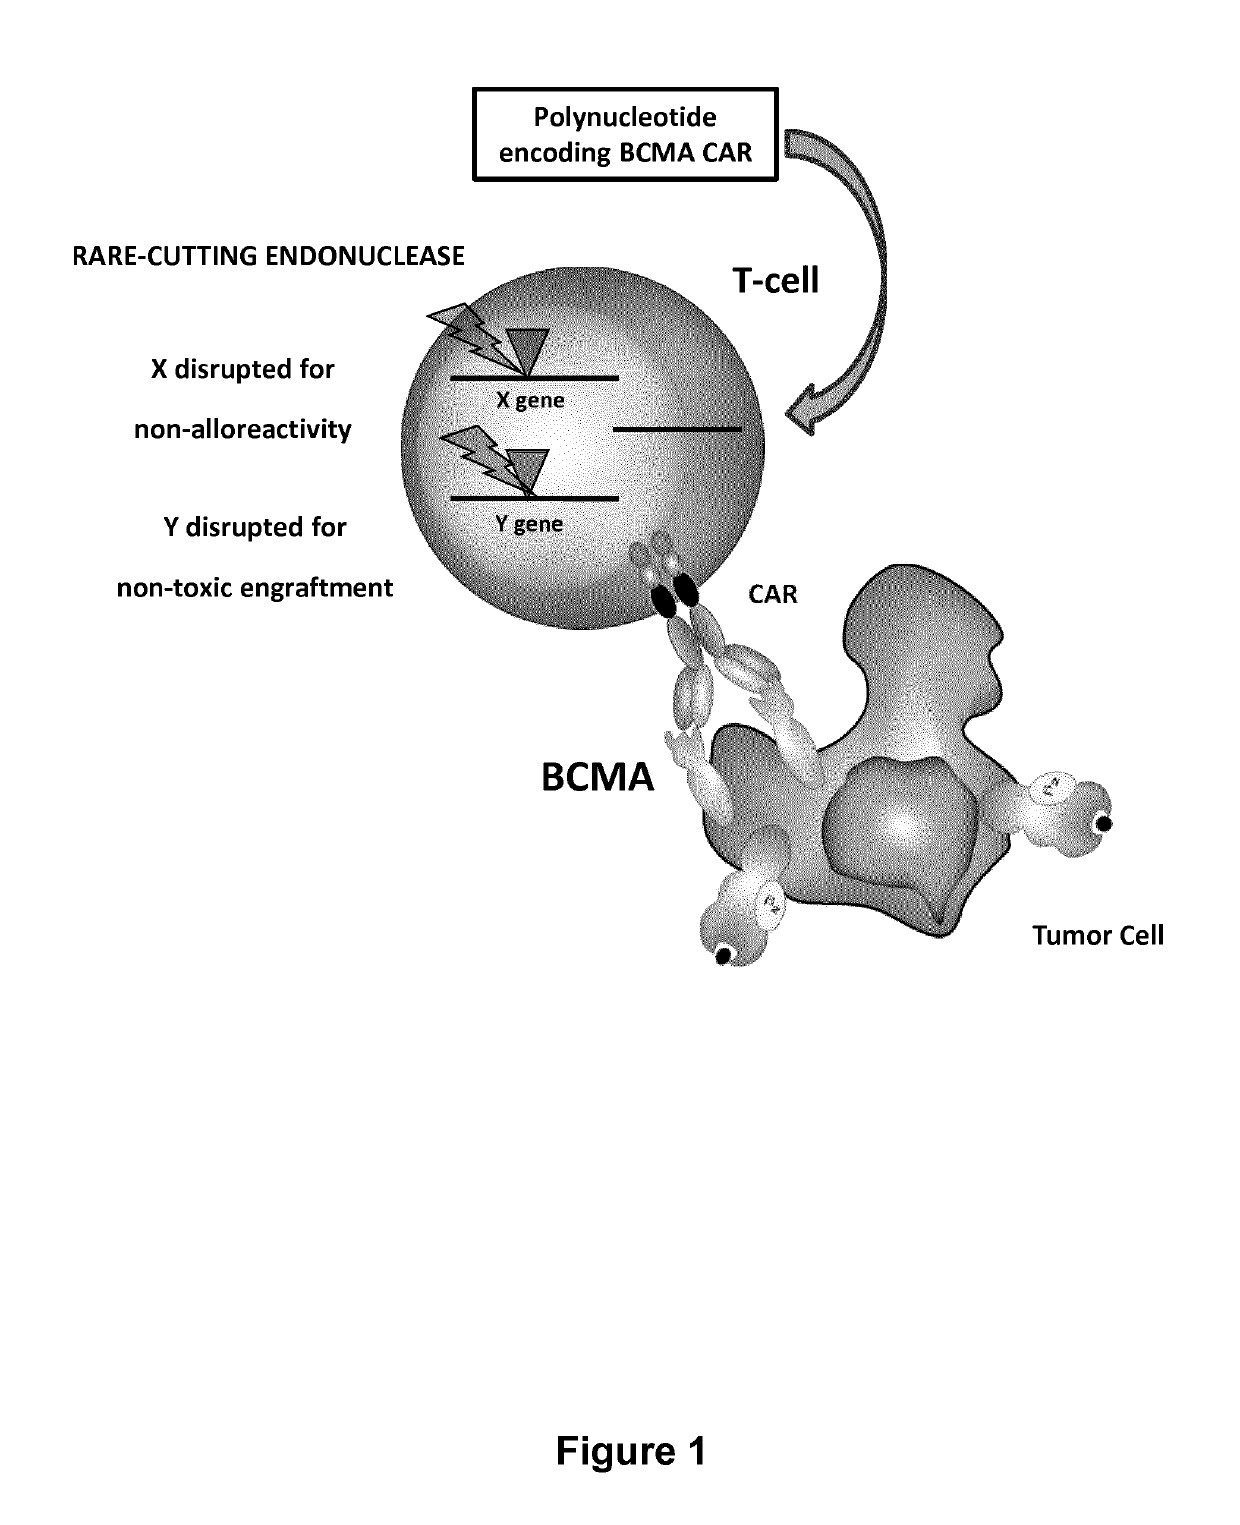 BCMA (CD269) specific chimeric antigen receptors for cancer immunotherapy